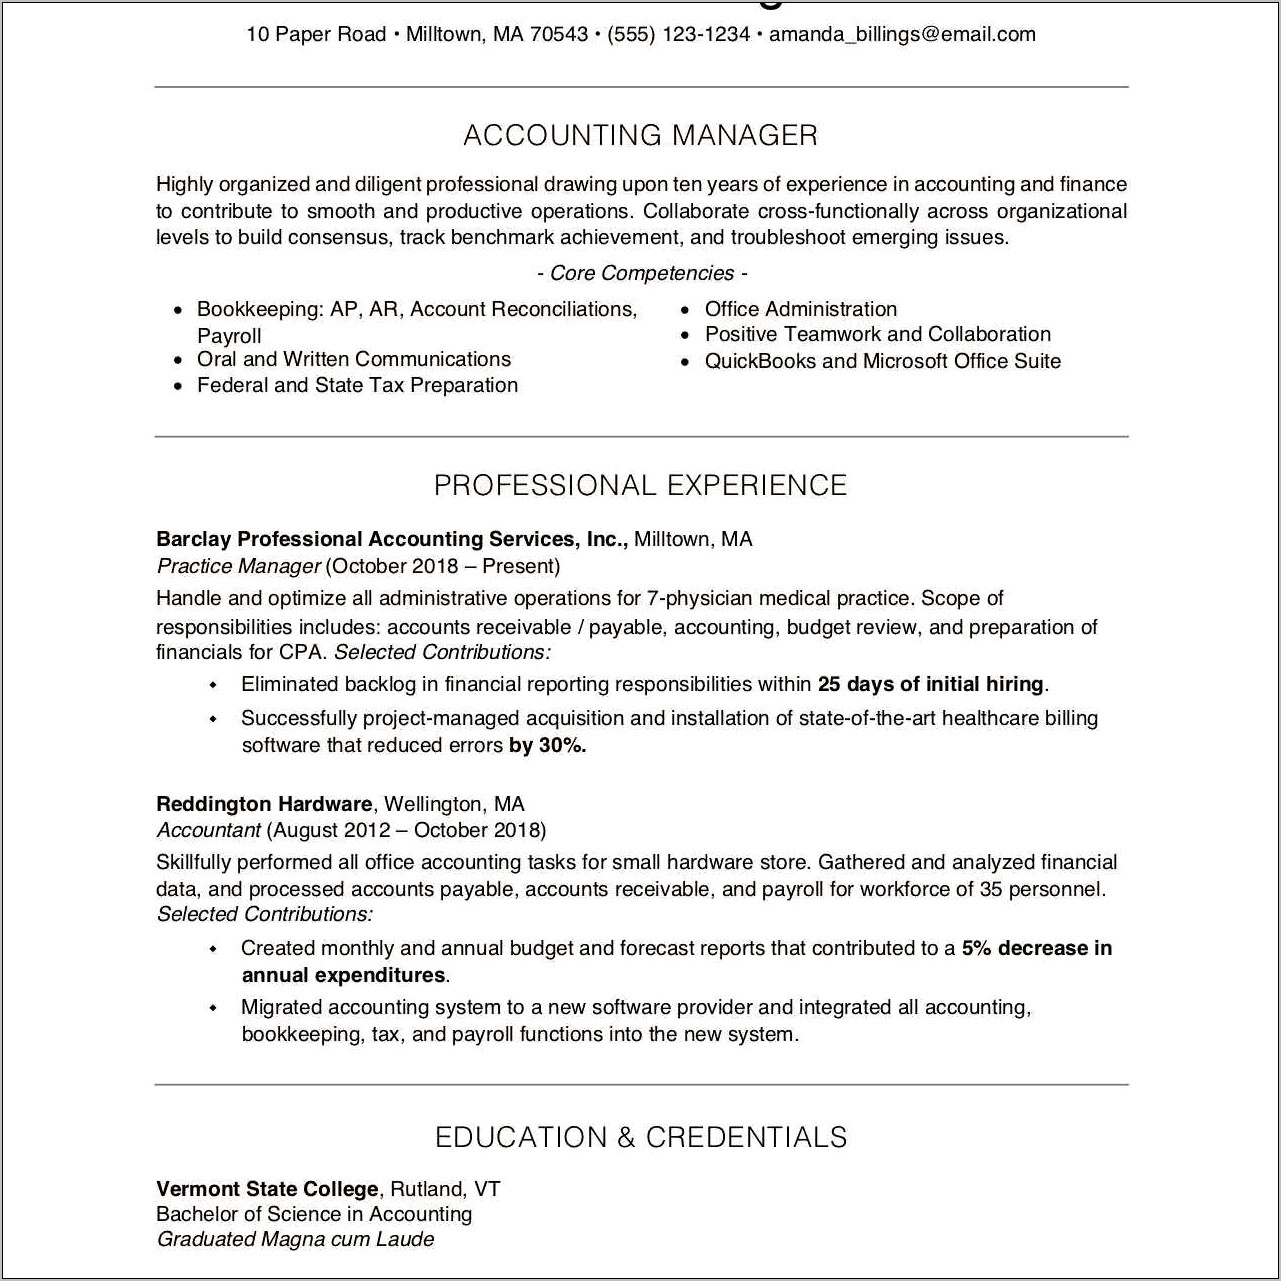 Resume Templates For Microsoft Word On Office.com